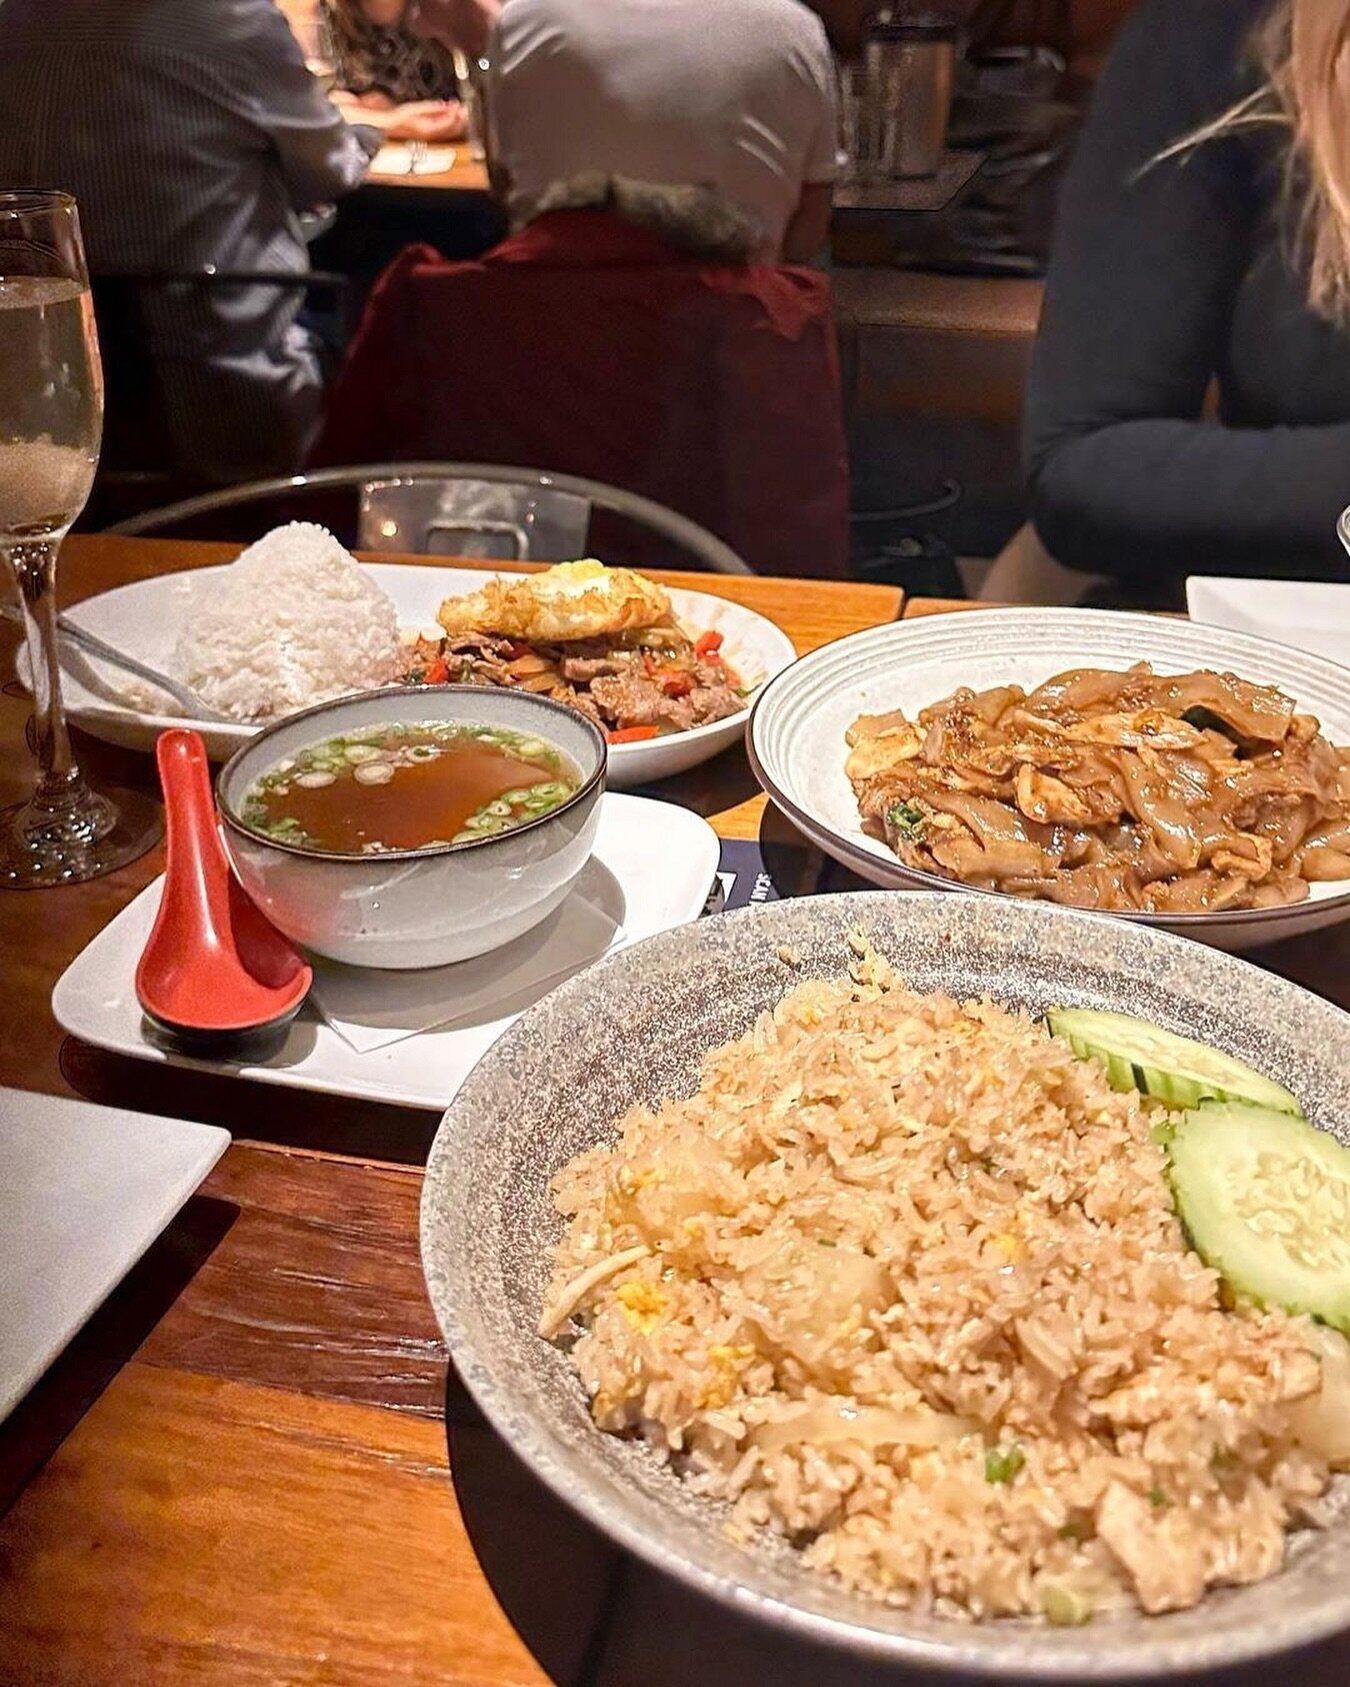 Thank you! 📸: dateswithgrace
&bull;
📍Chai Thai Kitchen

Spontaneously walked inside in New York City. made me realize nyc food scene never betrays. We got the pineapple fried rice, chicken pad see ew and beef kha pow with a fried egg. The best pad 